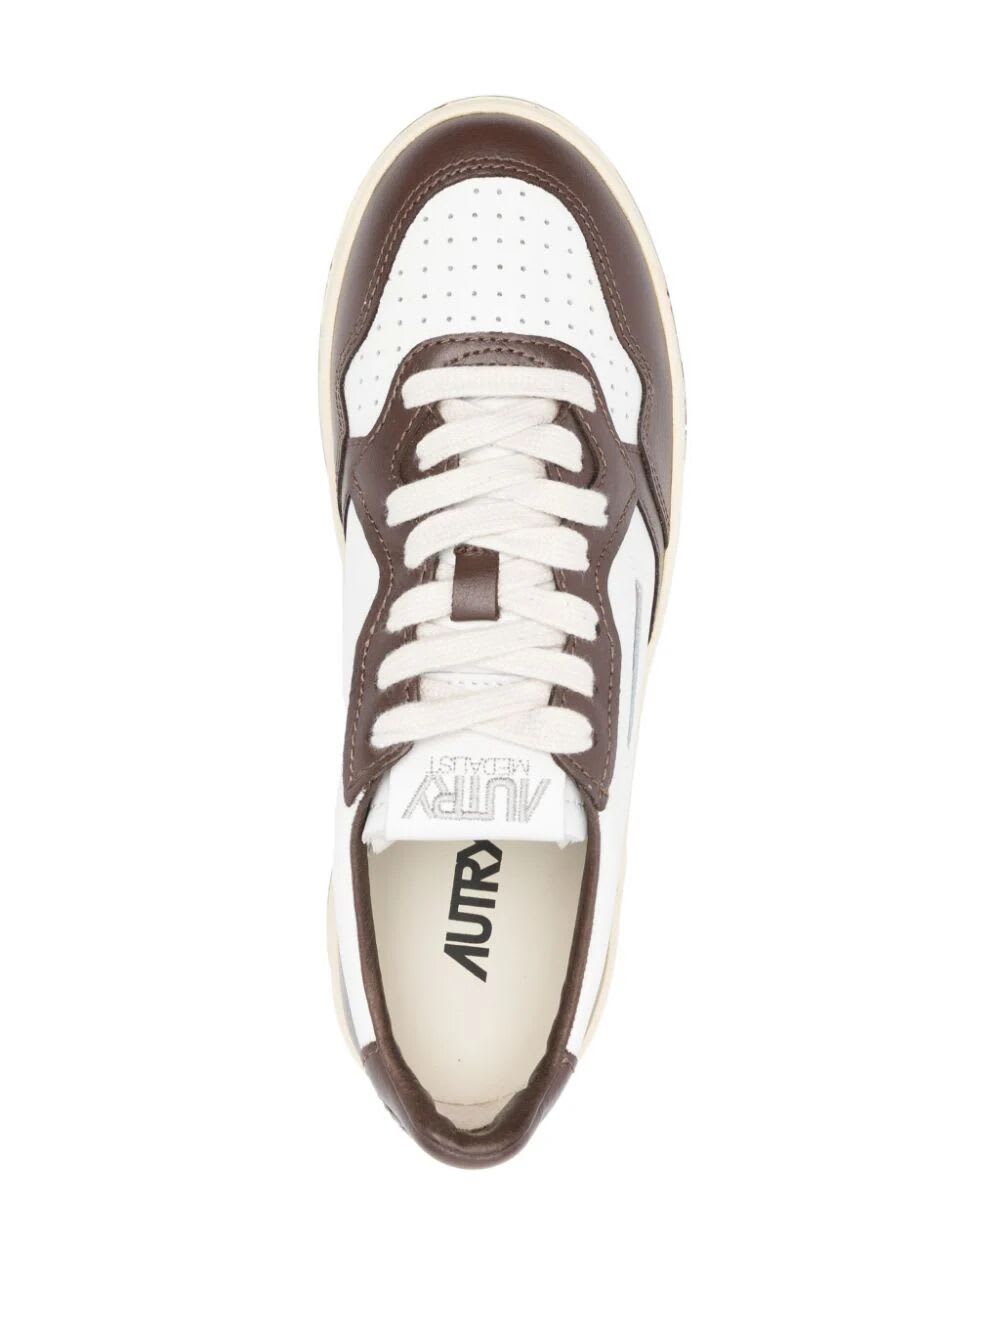 Shop Autry Low Platform Sneakers In White Chestnut